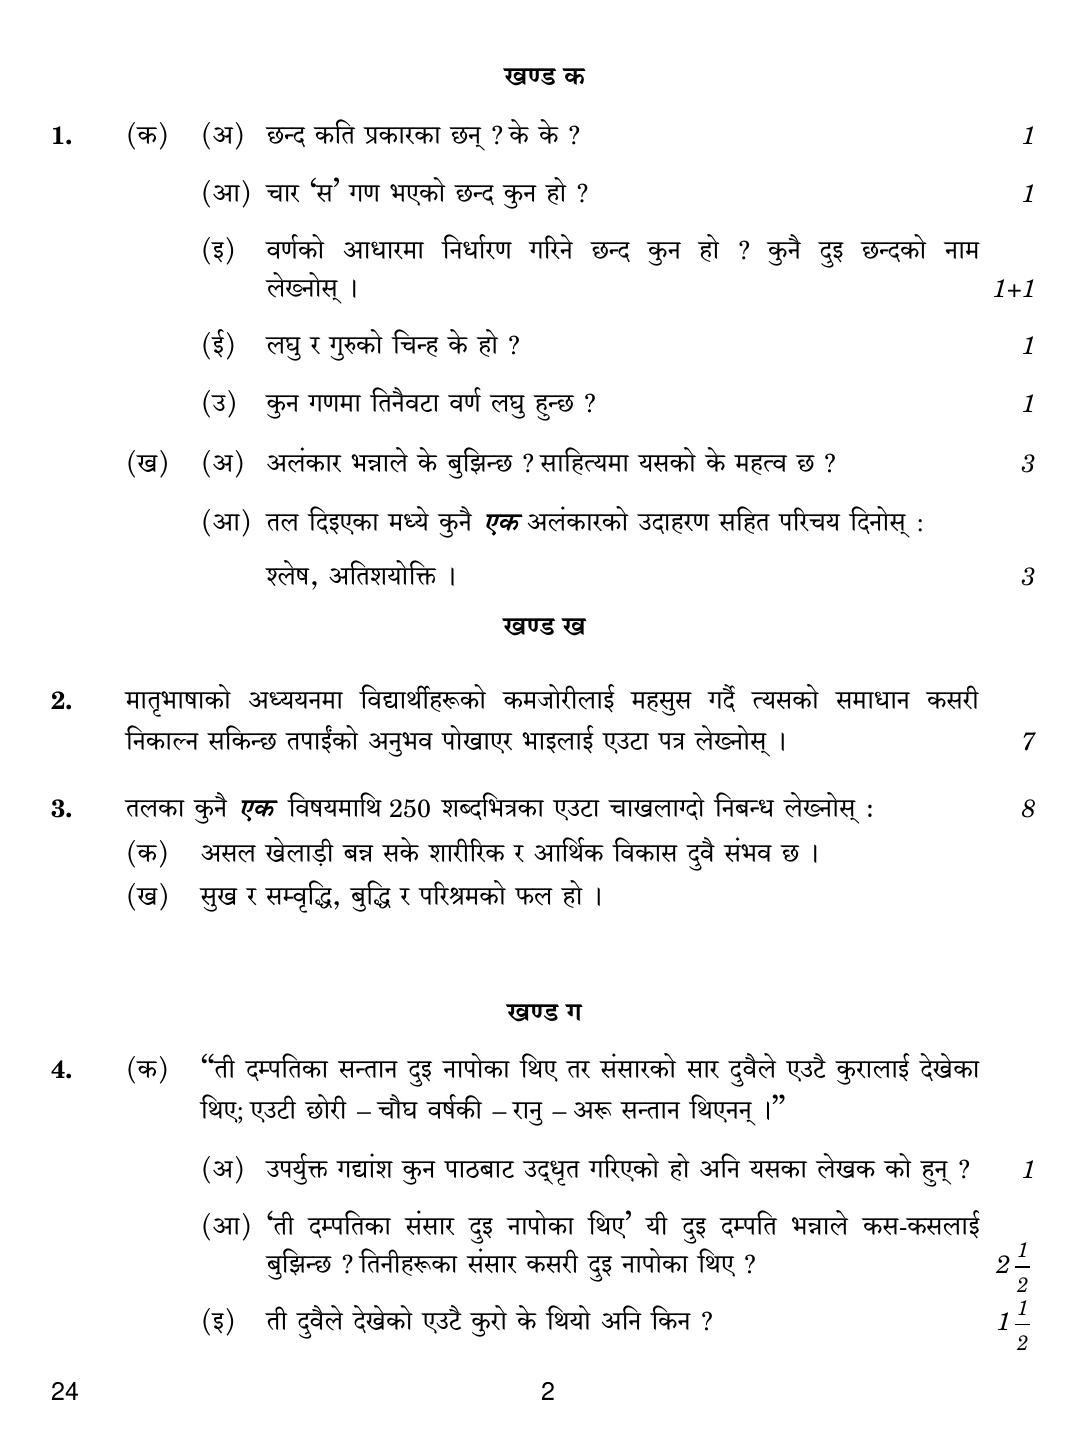 CBSE Class 12 24 NEPALI 2019 Compartment Question Paper - Page 2